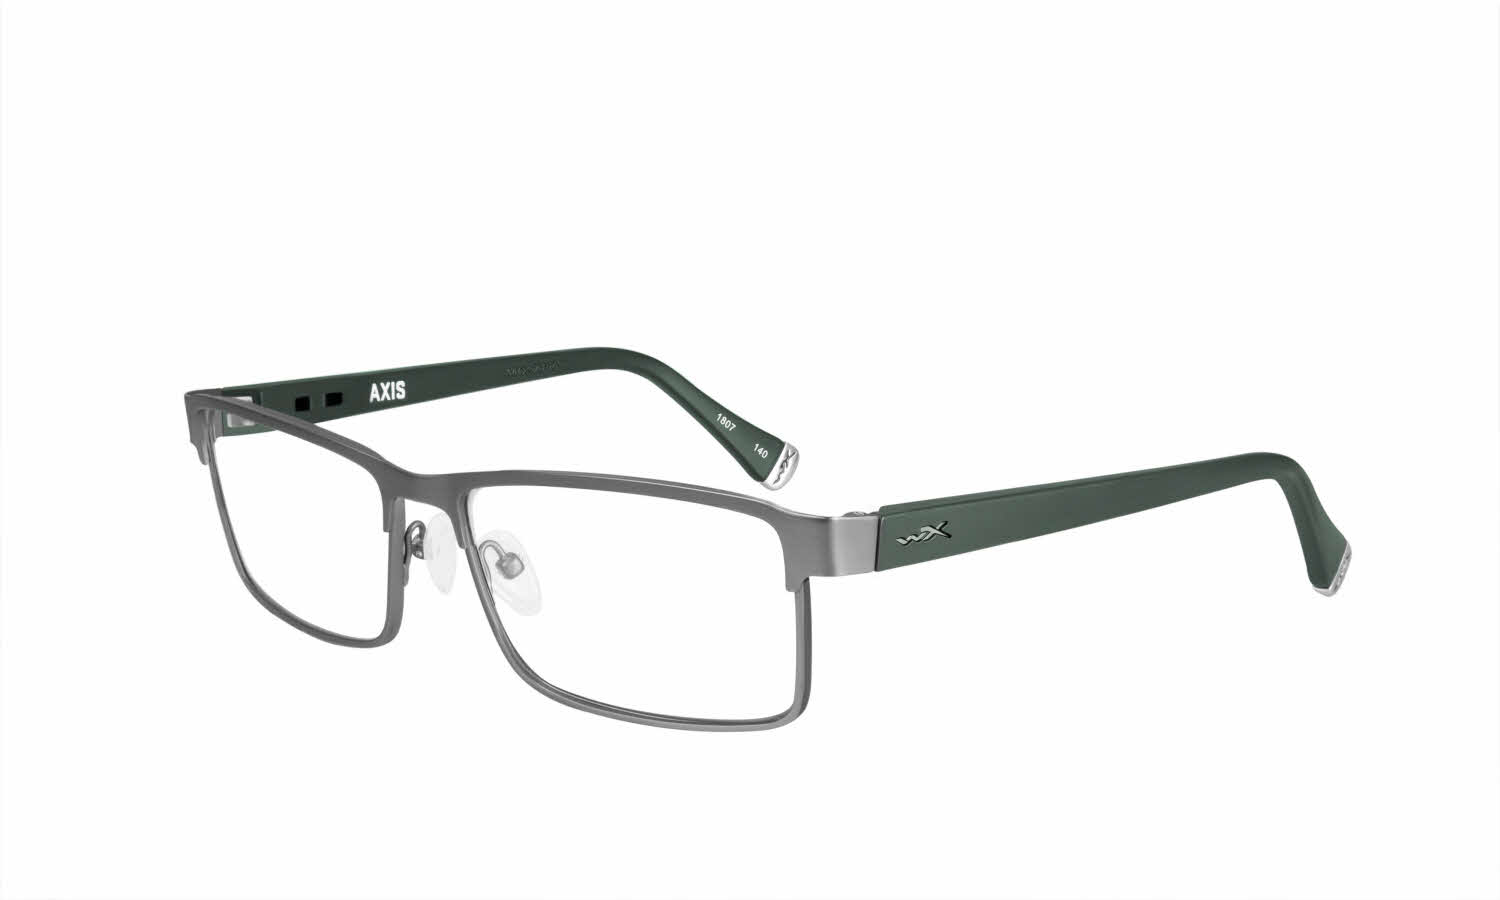 Wiley X WorkSight WX Axis with Side Shields Eyeglasses